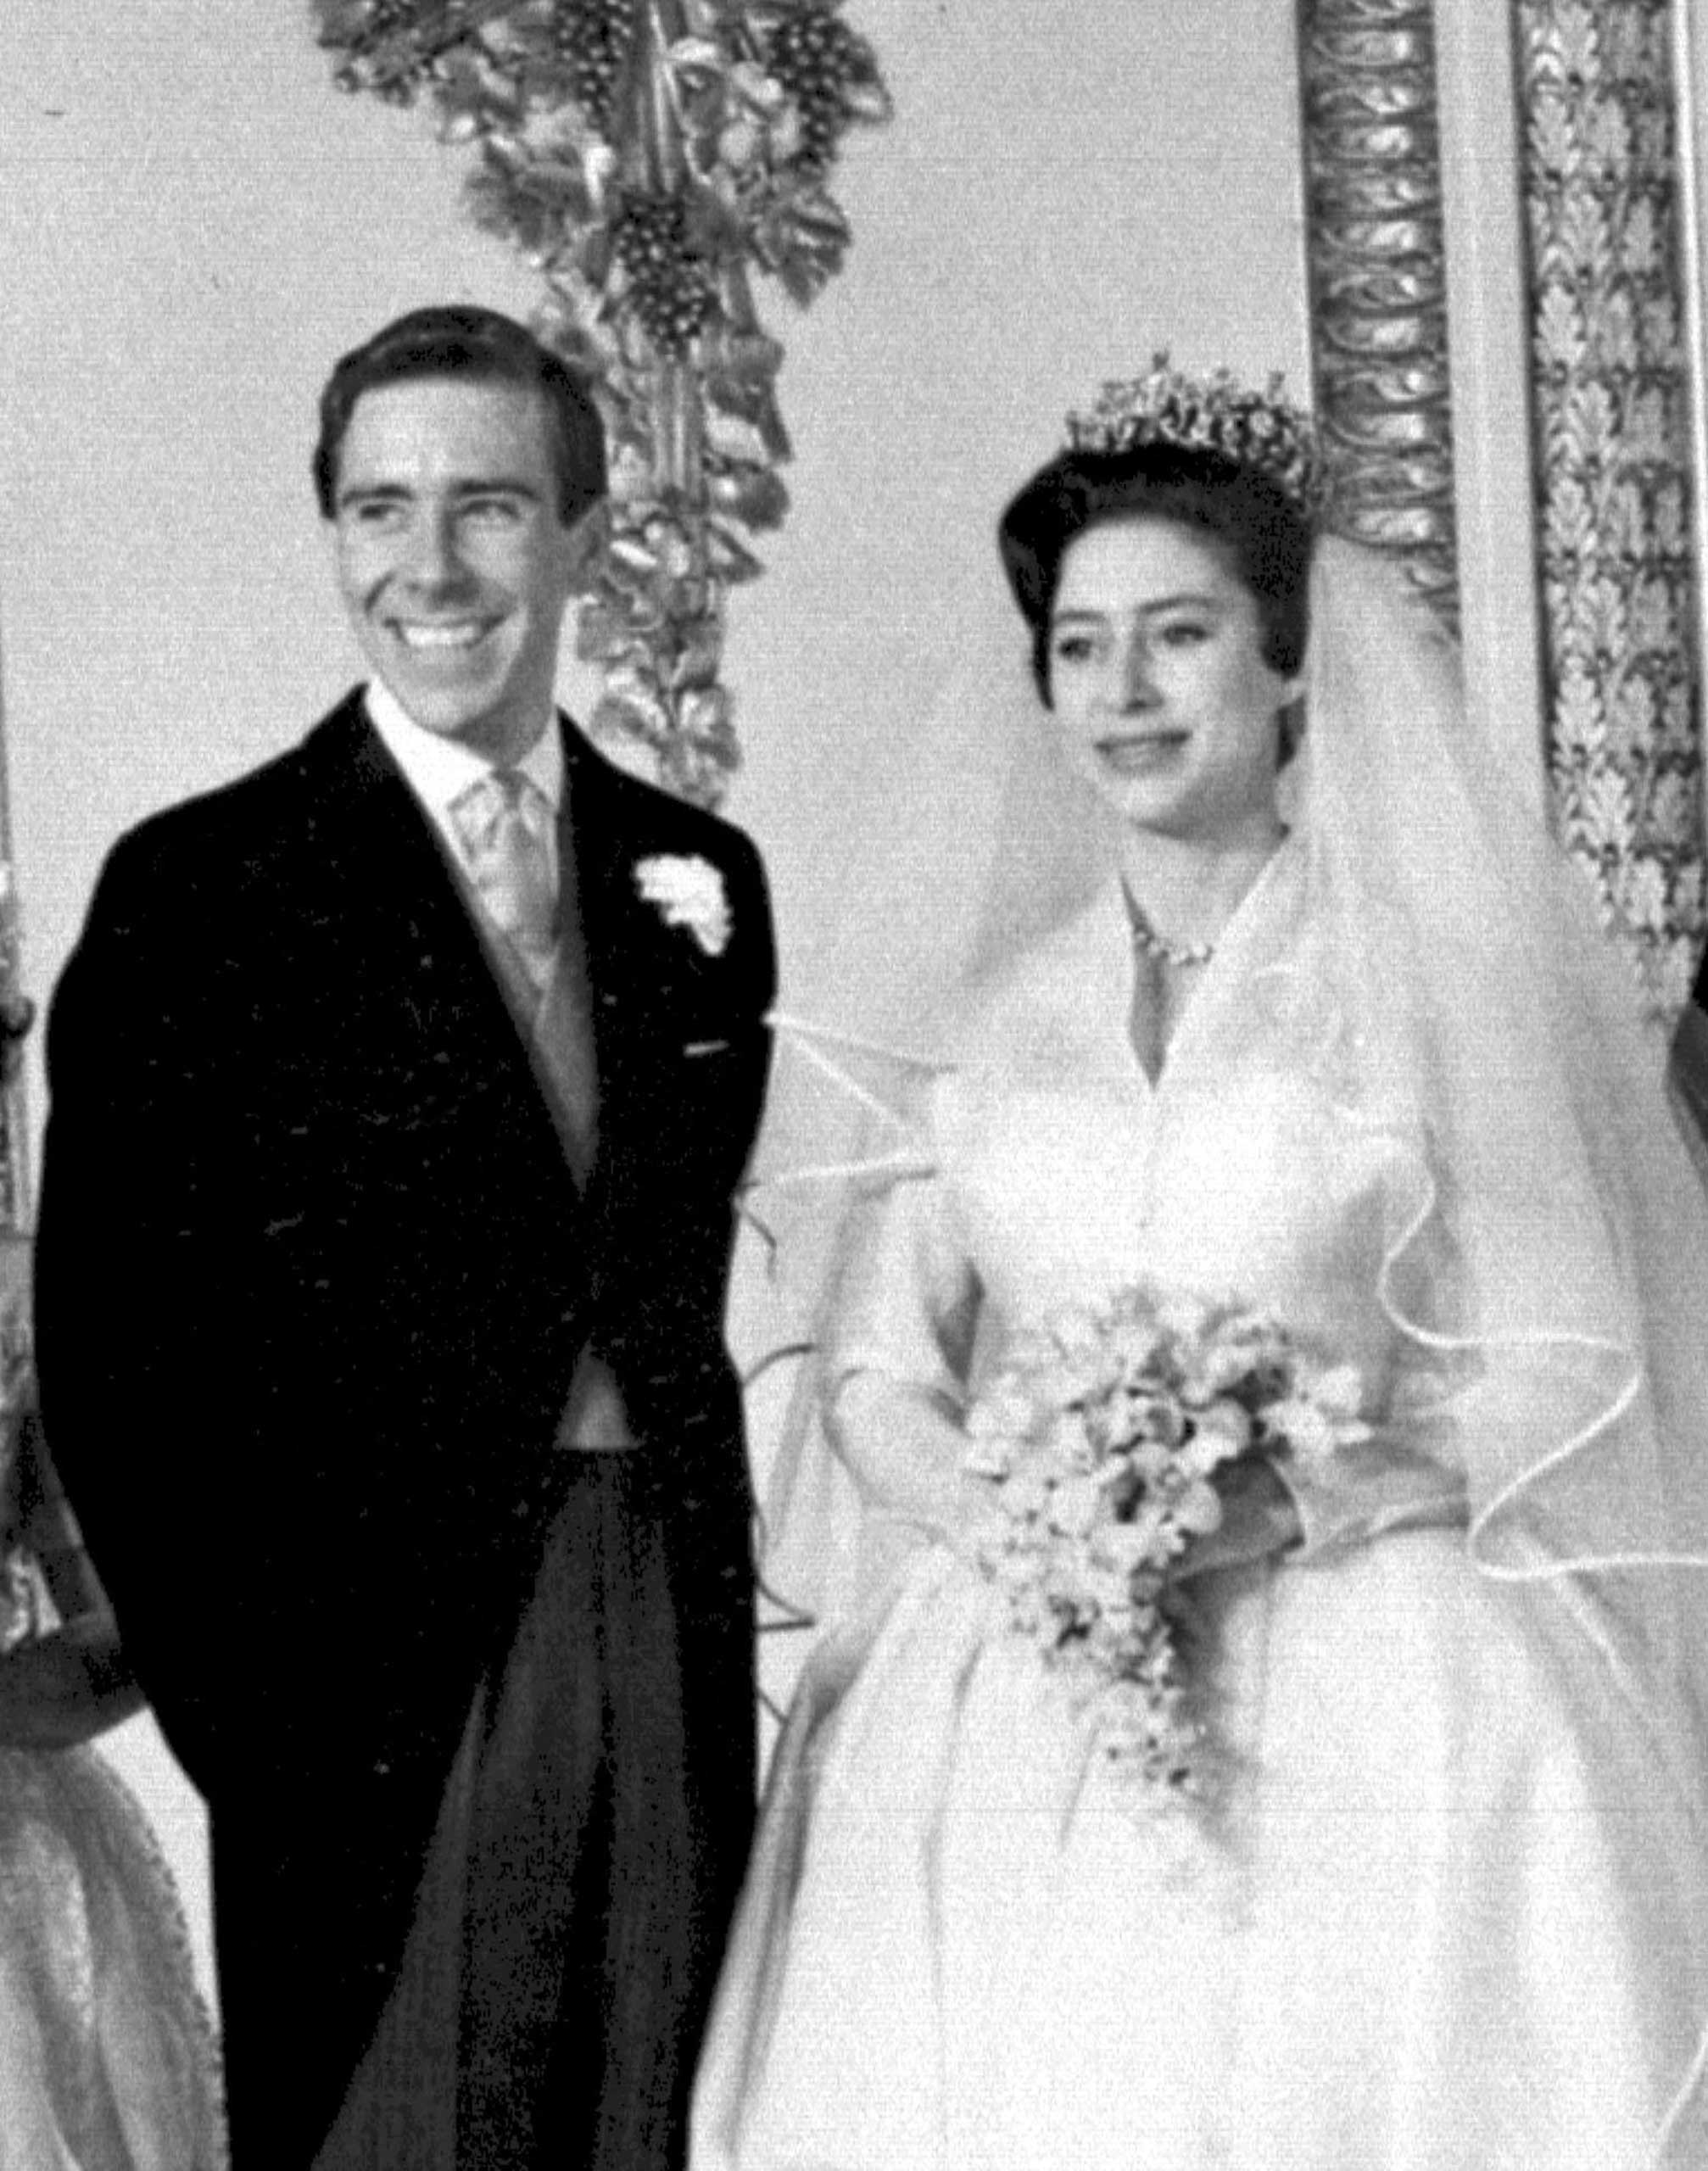 Princess Margaret and Anthony Armstrong-Jones at Buckingham Palace at their marriage ceremony at Westminster Abbey, London on May 6, 1960.